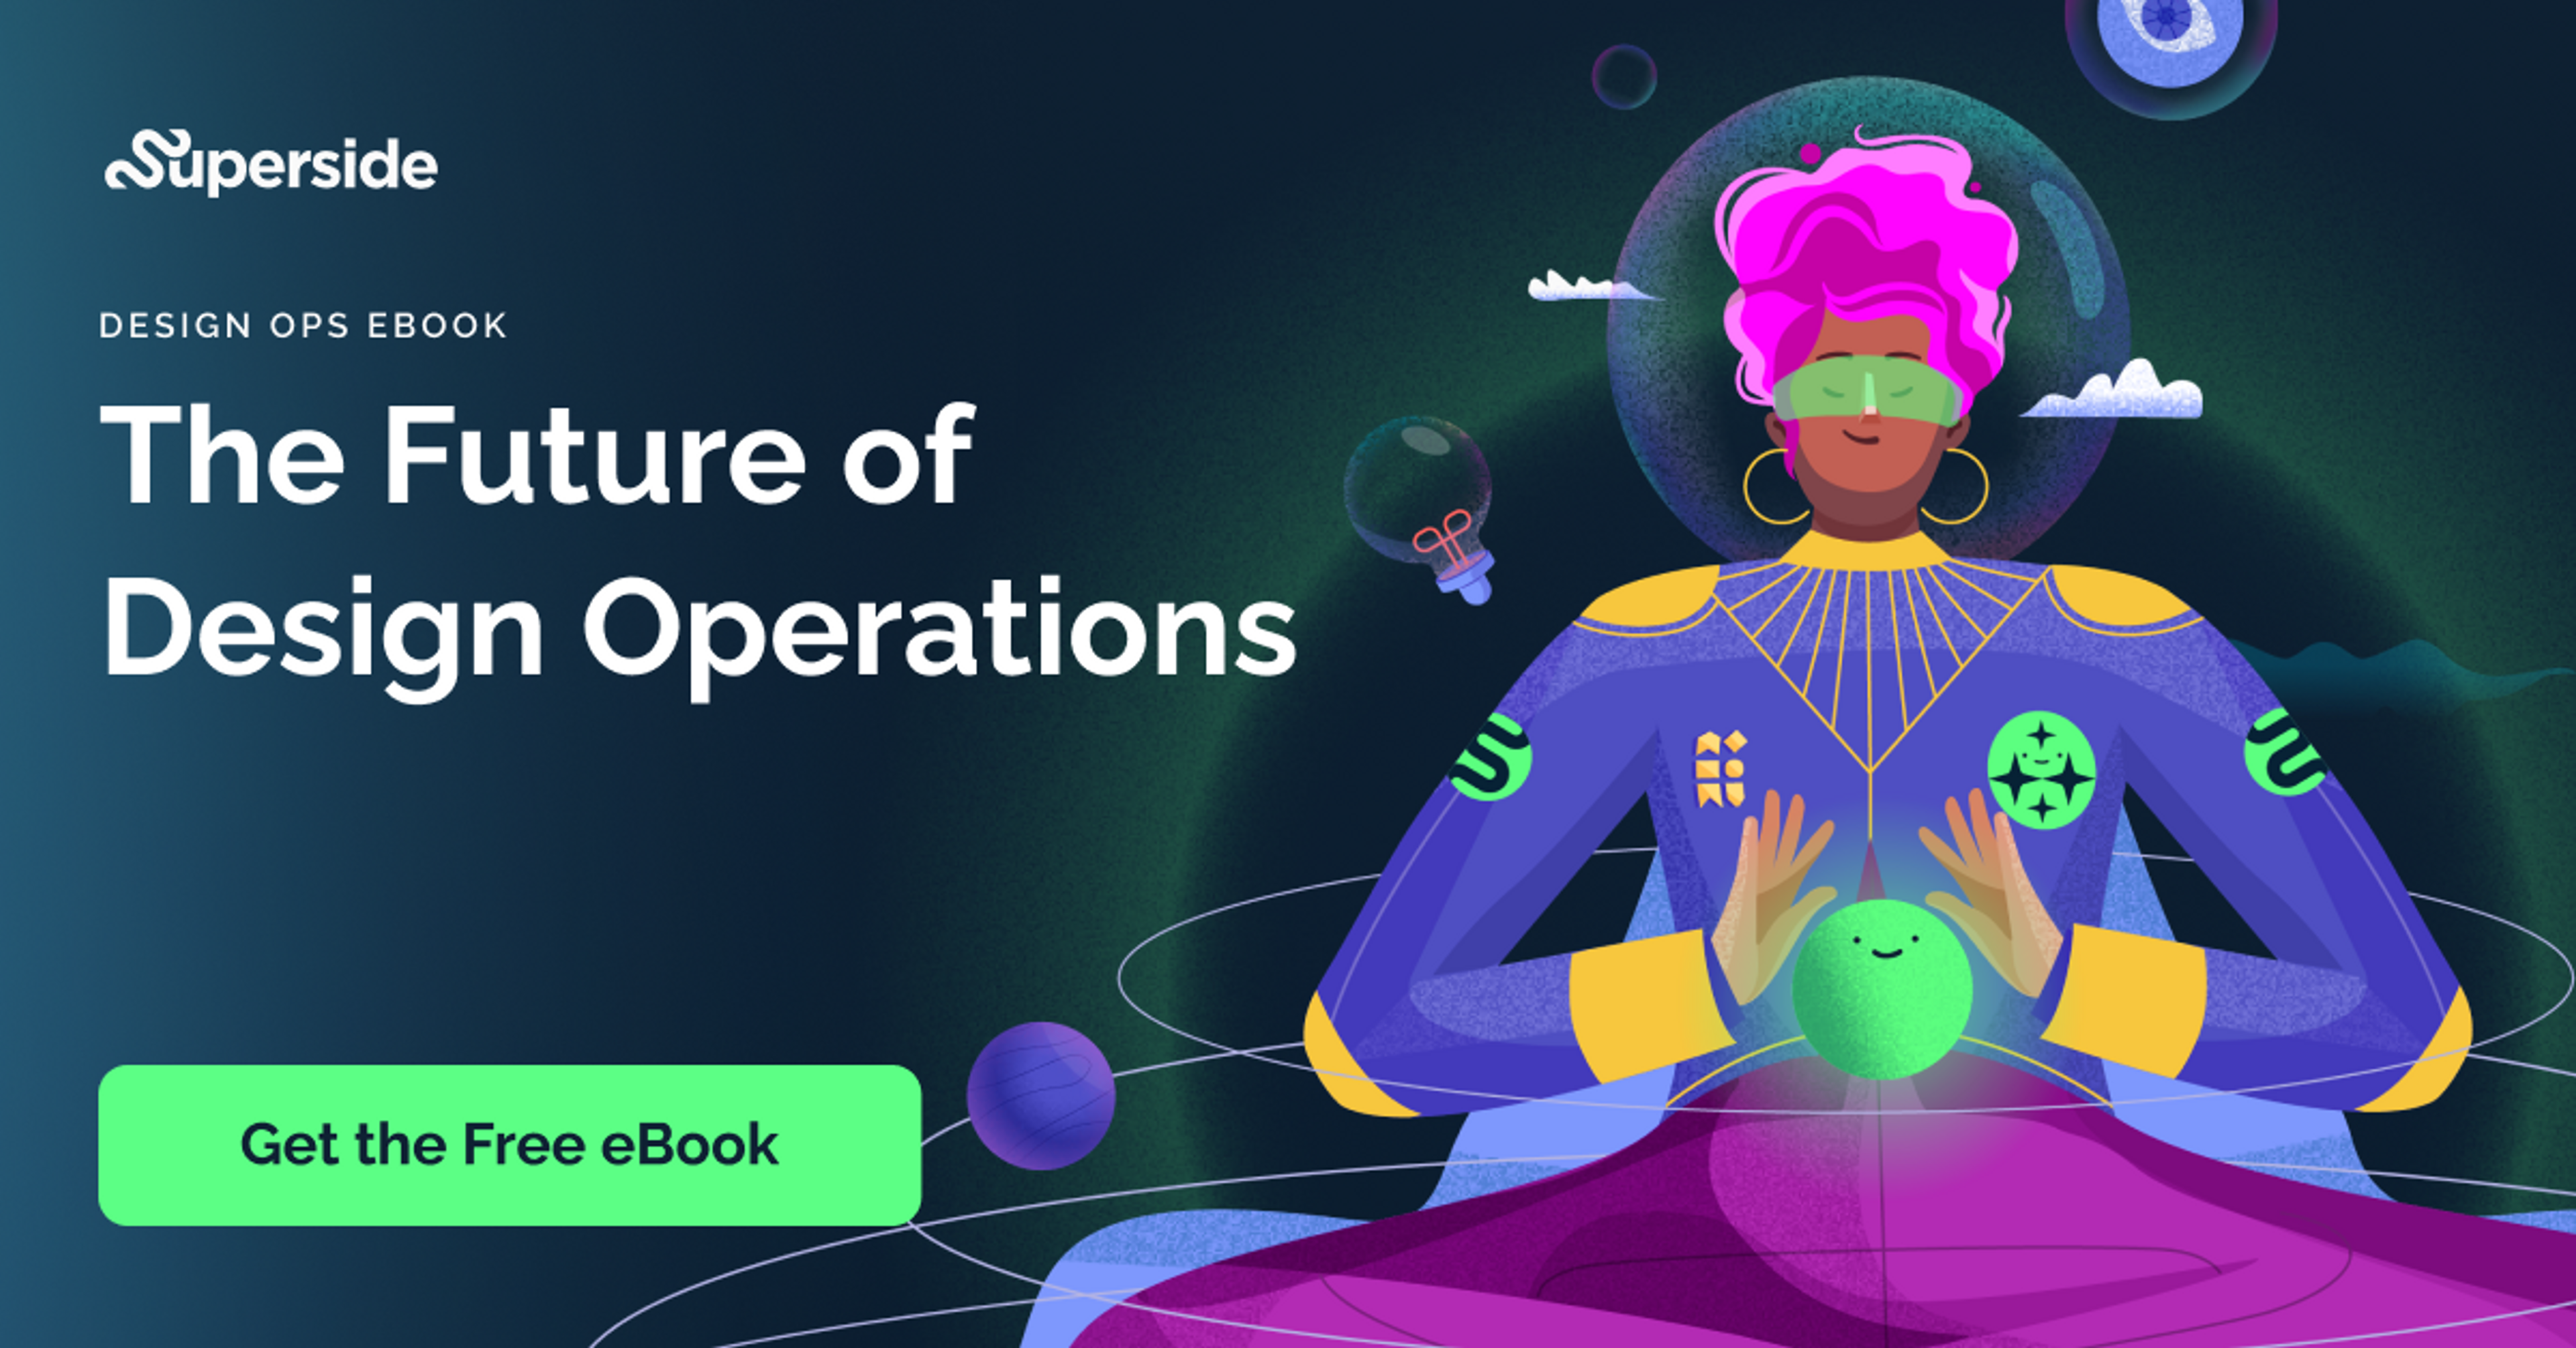 The Future of Design Operations